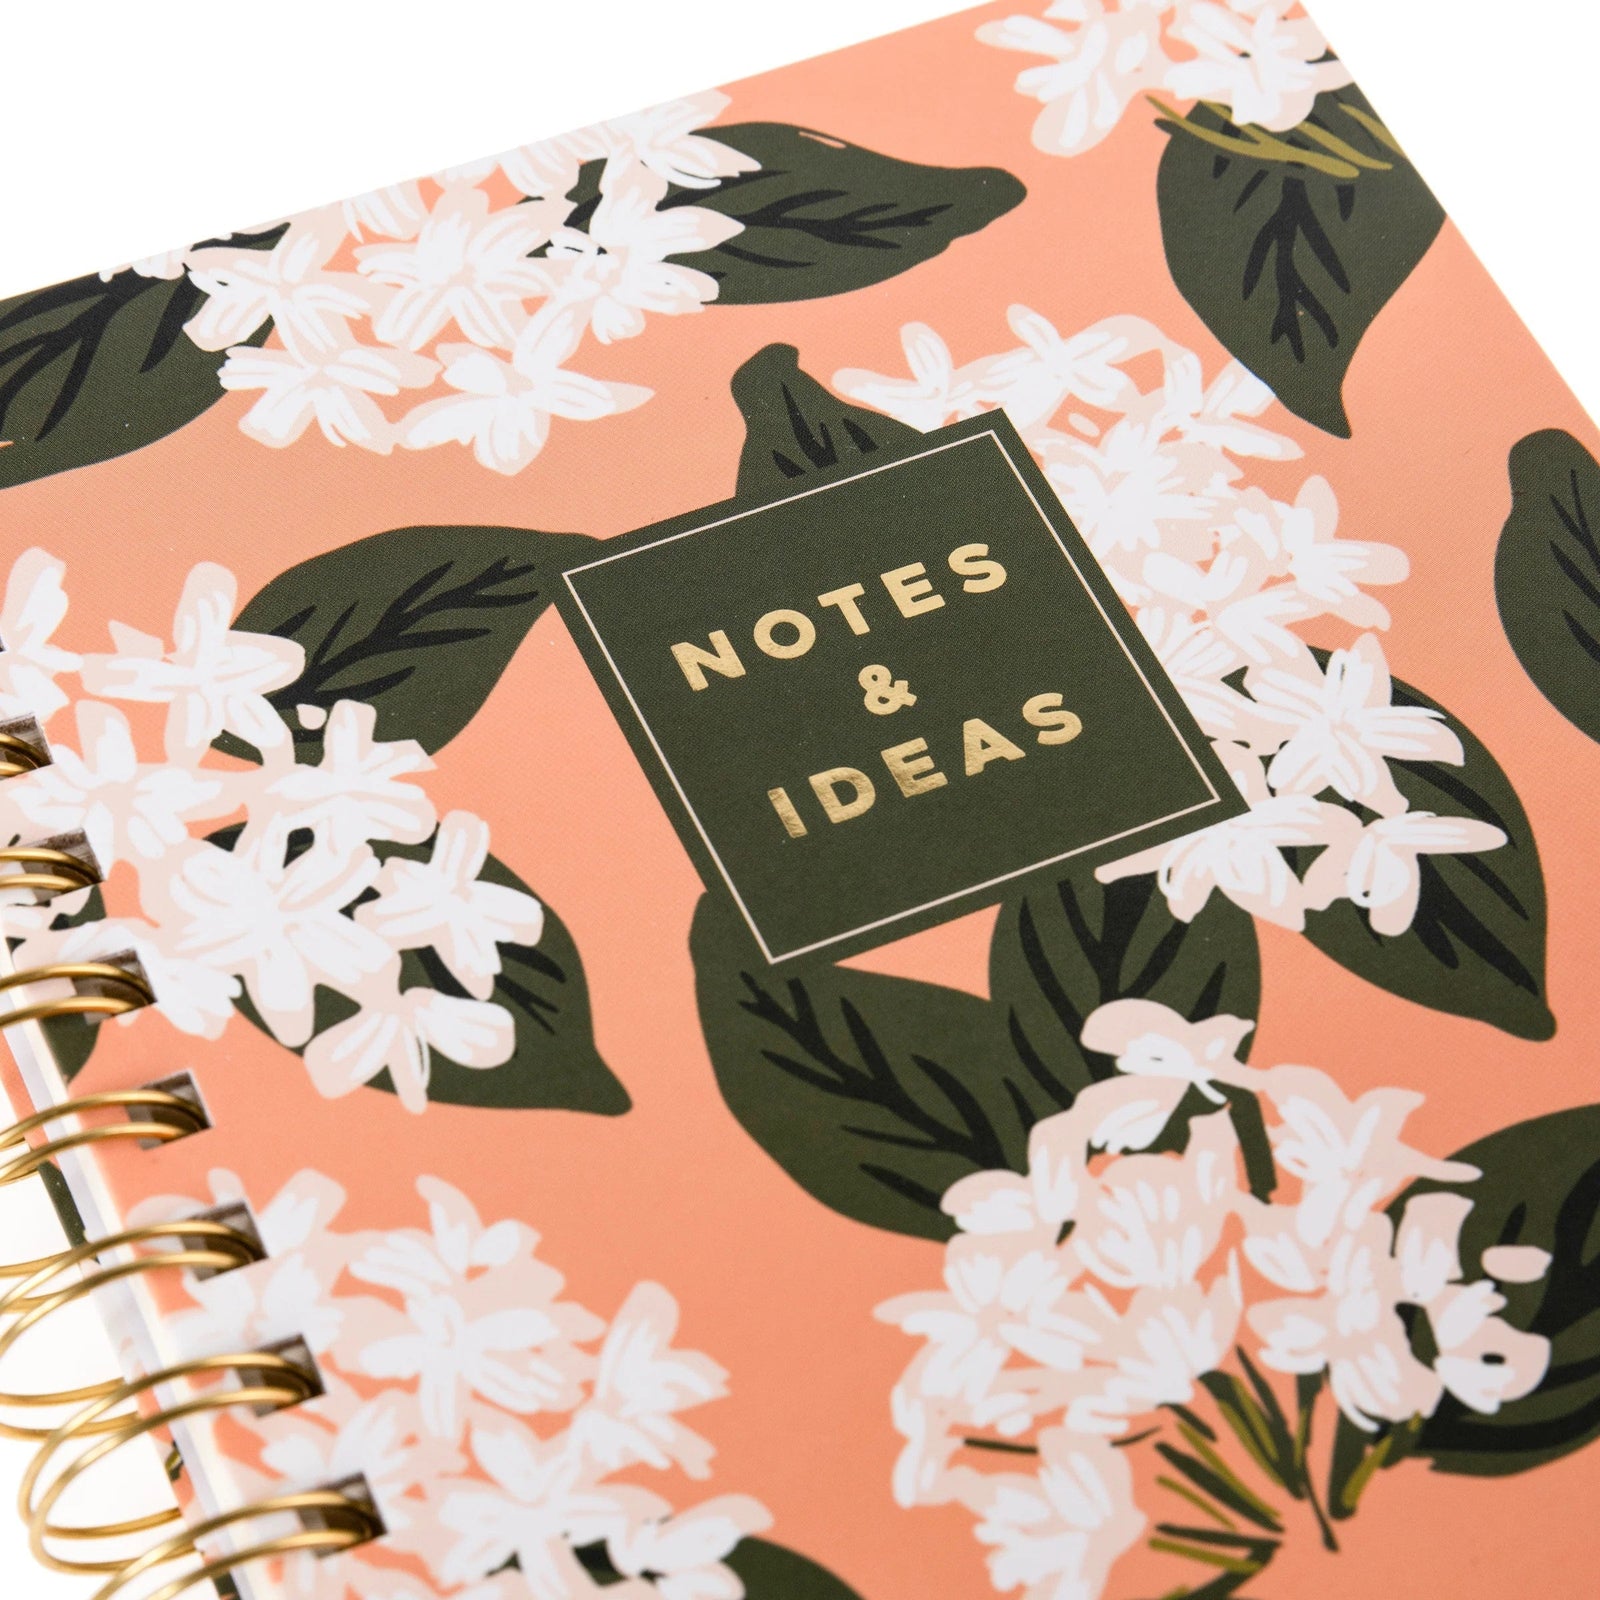 Notes & Ideas Jasmine Flowers Spiral Hard Cover Journal | 160 Ruled Pages Spiral-bound Notebook | 6.25"x 8.25"